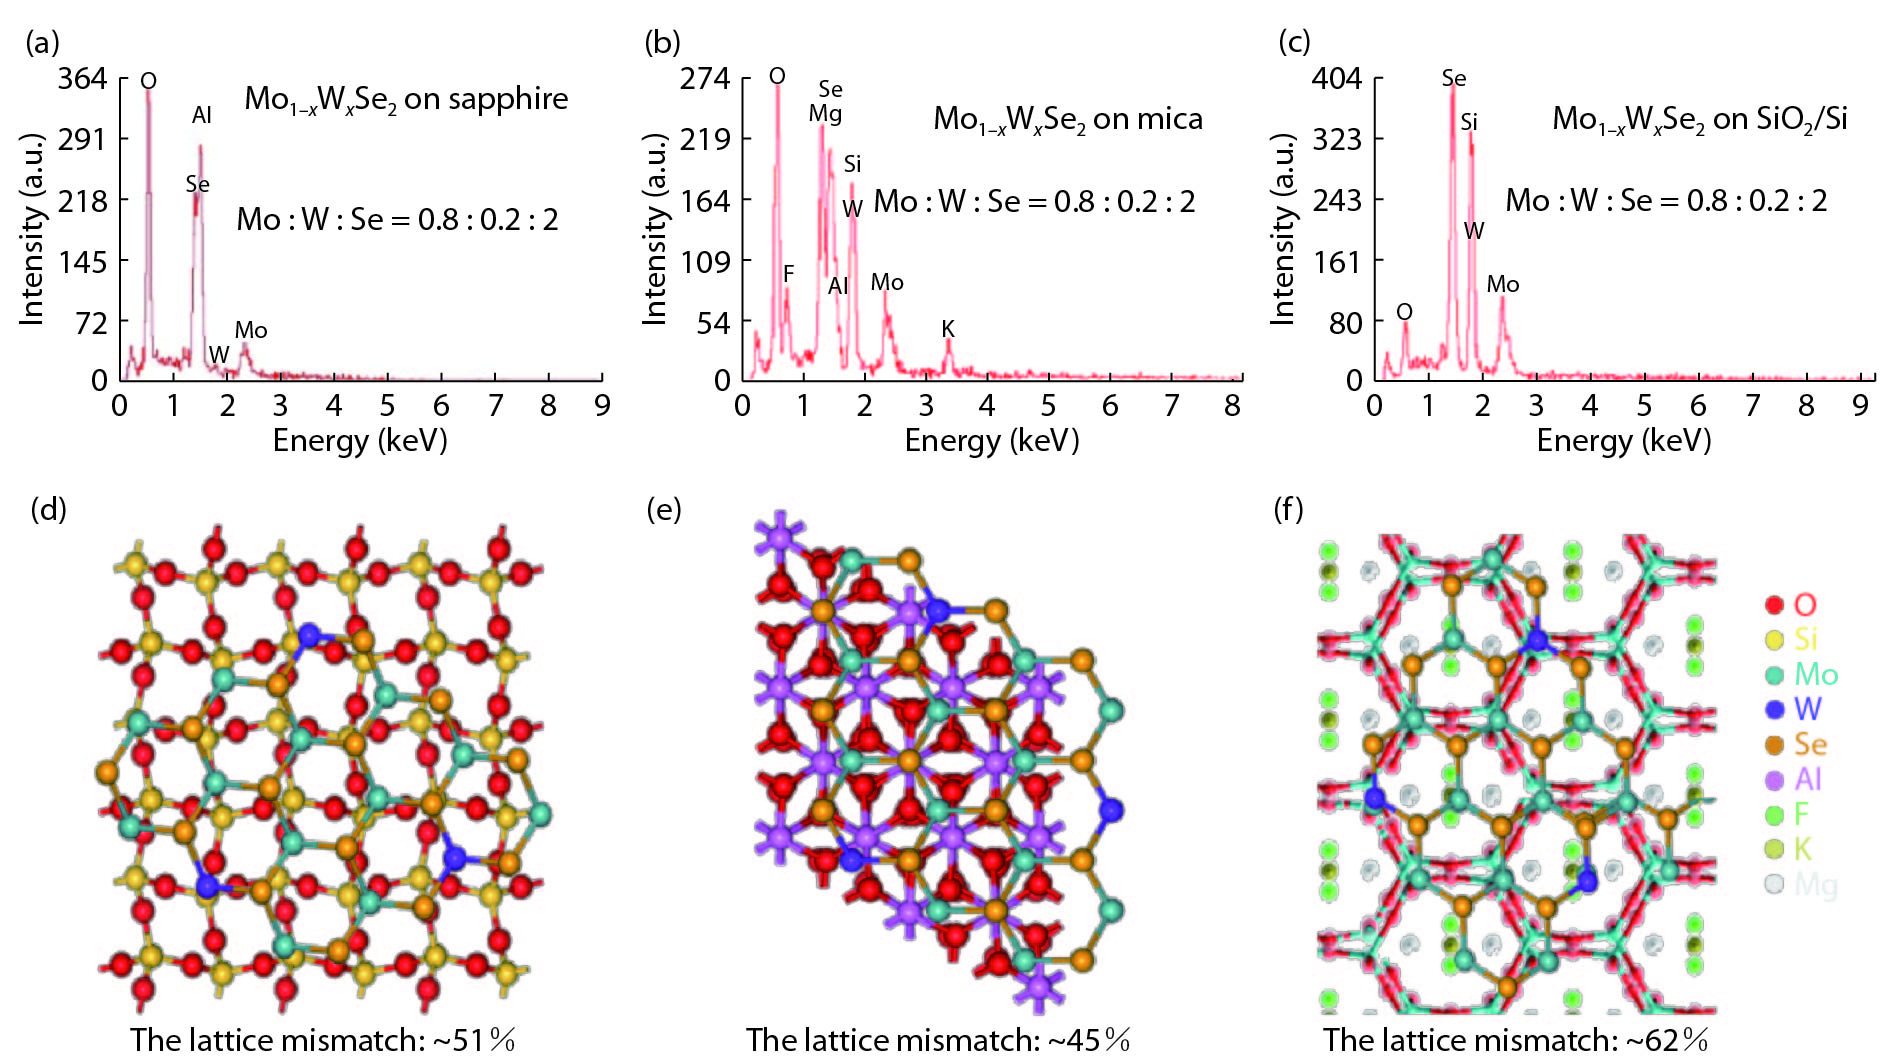 (Color online) The EDX and lattice mismatch images of as-grown samples on different substrates. (a–c) show the EDX images of Mo0.8W0.2Se2 alloys grown on SiO2/Si, sapphire, and mica, respectively. (d–f) show the lattice mismatch images of Mo1−xWxSe2 alloys on mica, SiO2/Si, sapphire, respectively. The lattice mismatches of Mo1−xWxSe2 alloys with SiO2/Si, sapphire, and mica are about 51 %, 45 %, and 52 %, respectively.